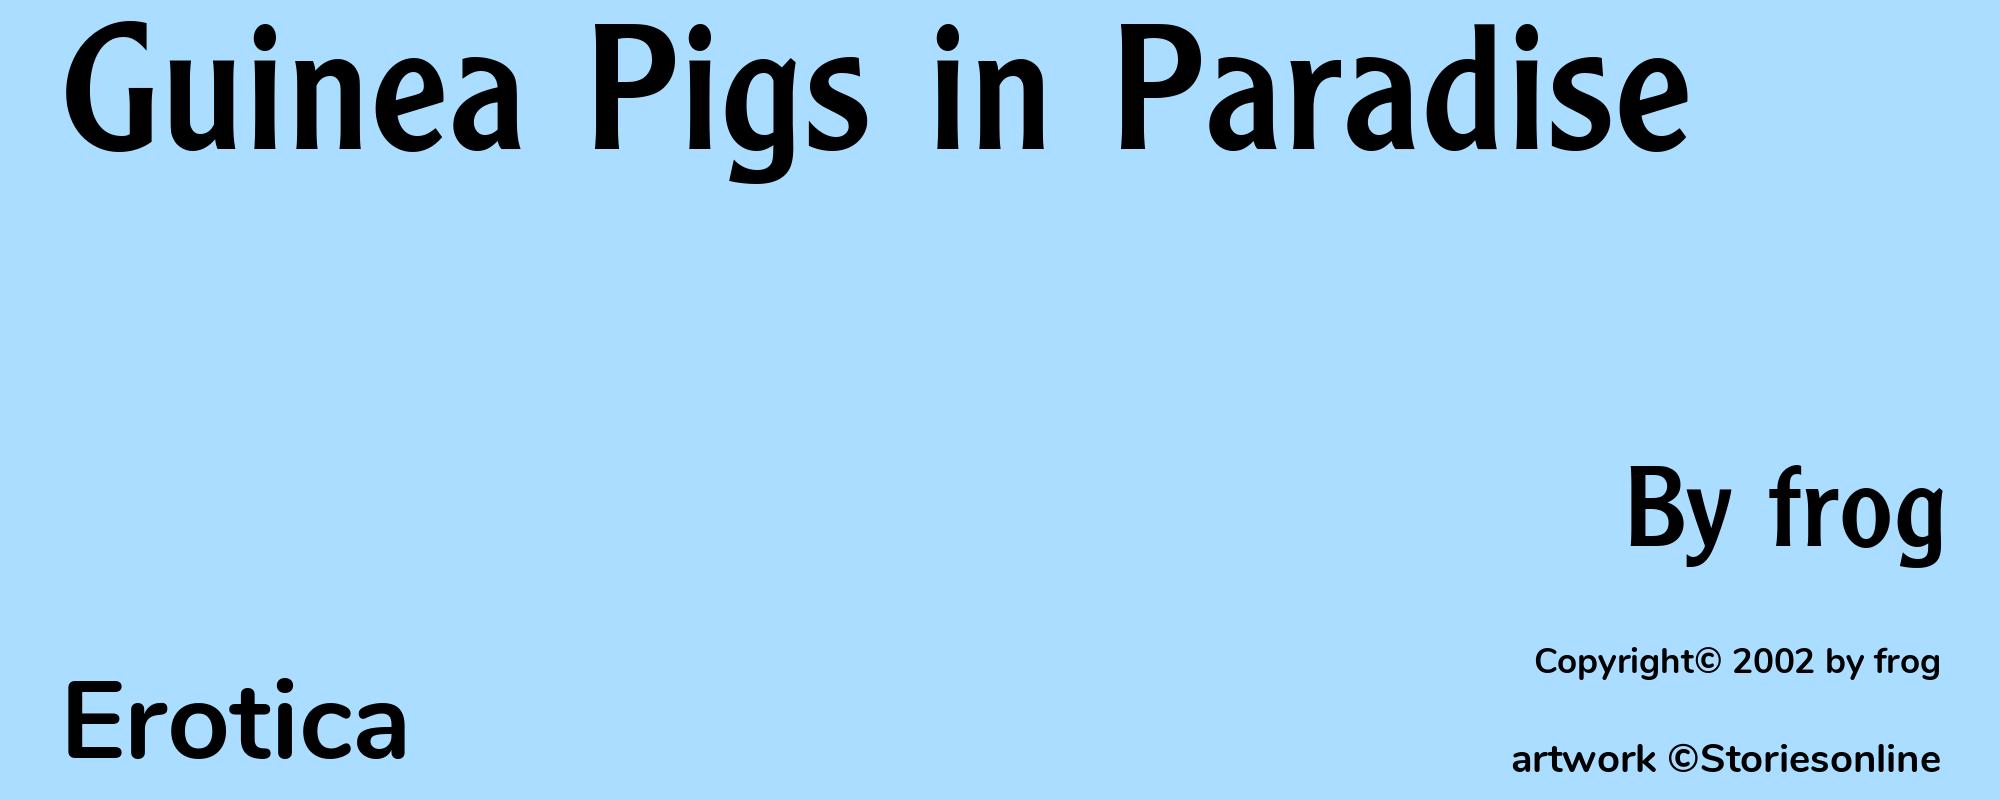 Guinea Pigs in Paradise - Cover